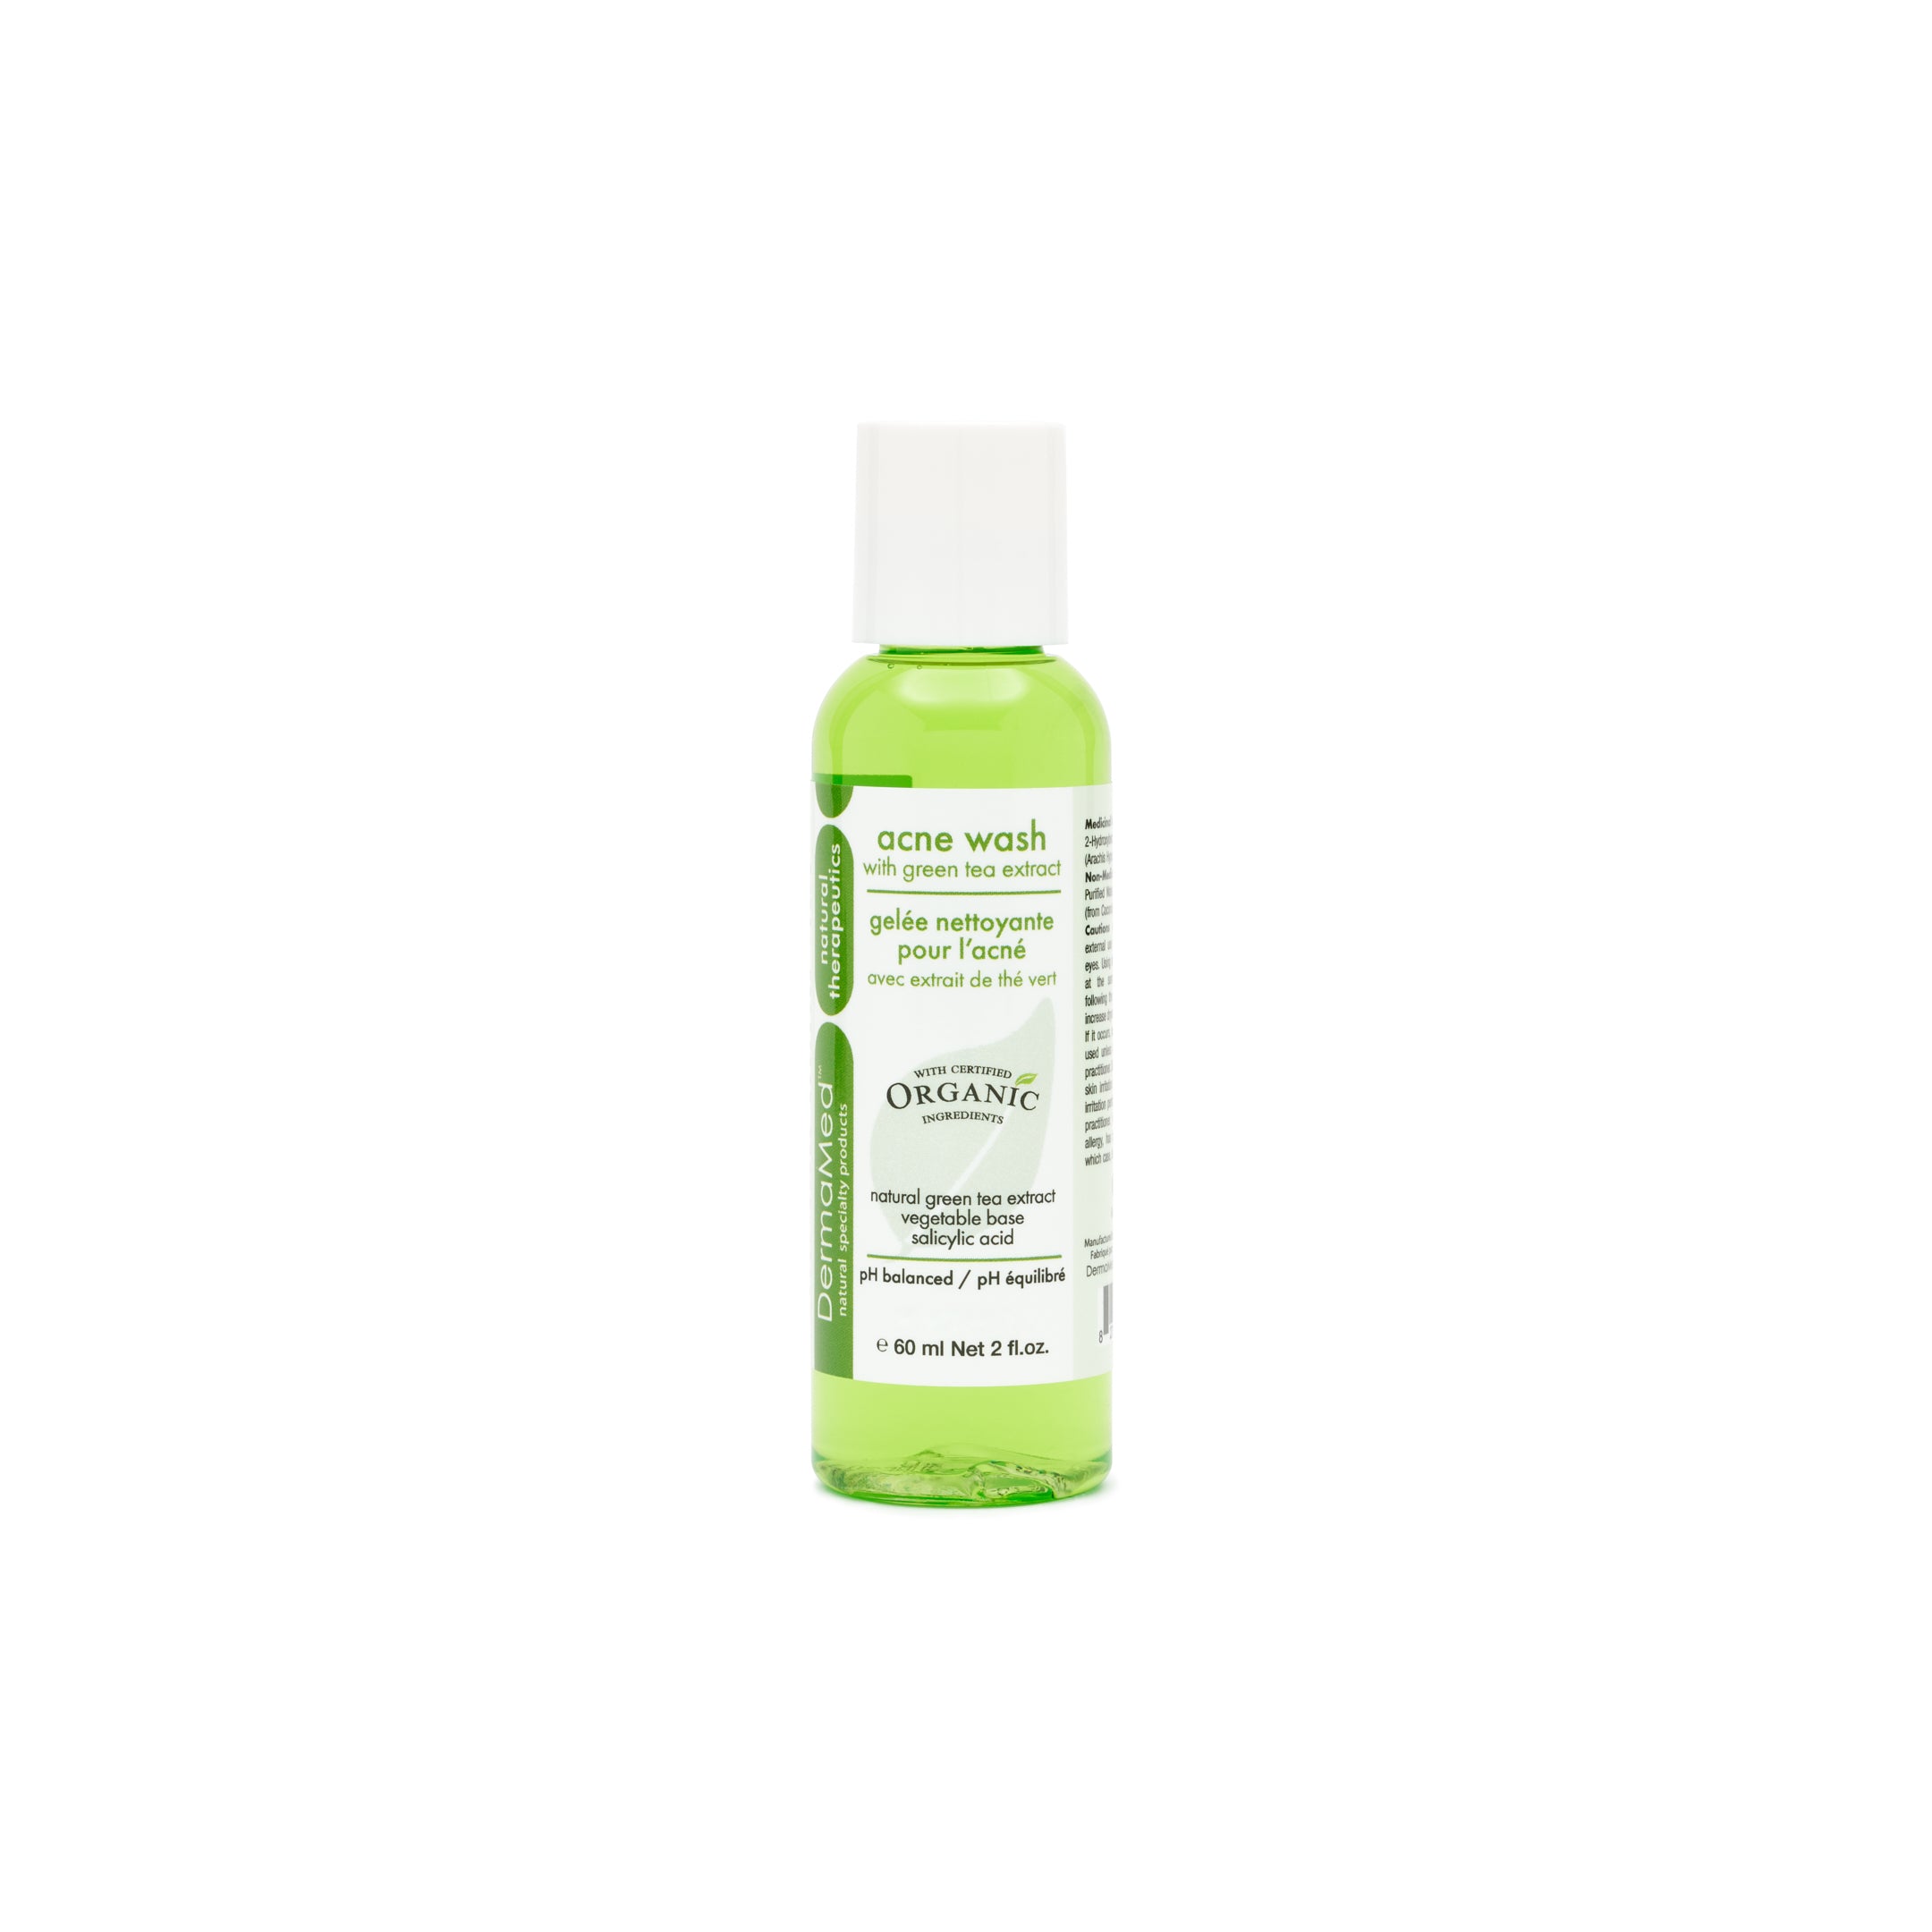 Mini Acne Wash with Green Tea Extract